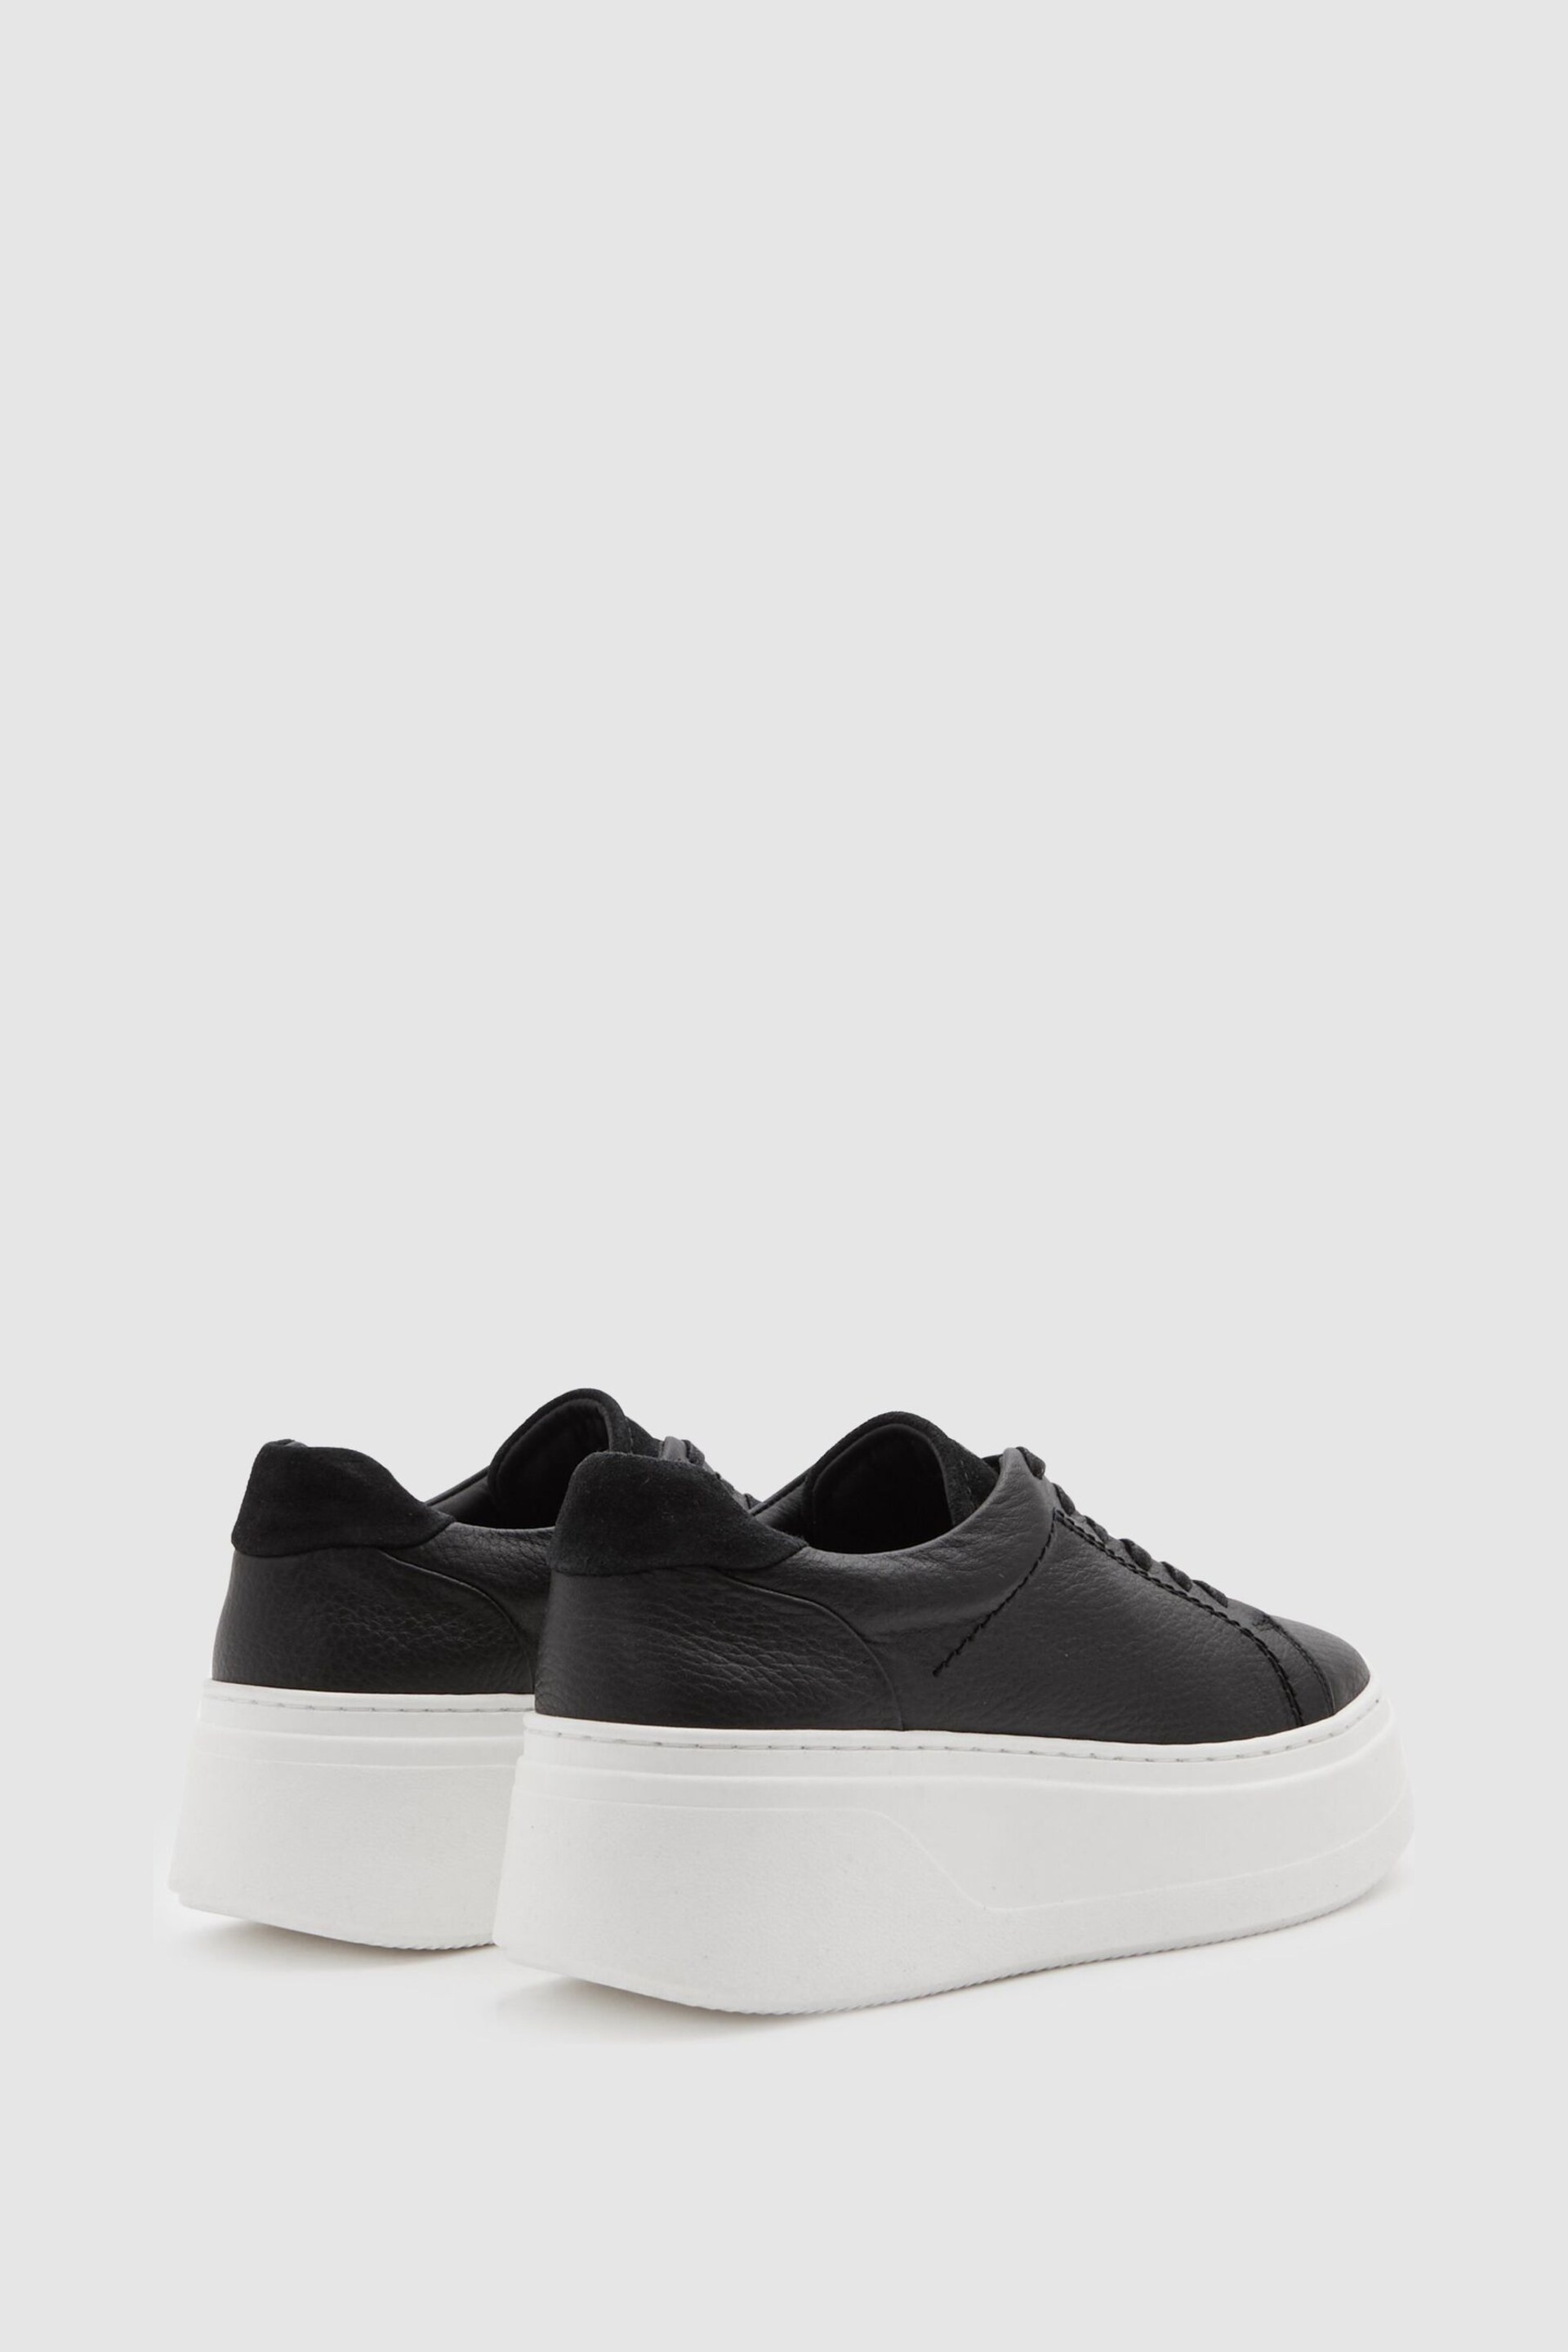 Reiss Black Connie Platform Leather Trainers - Image 4 of 5